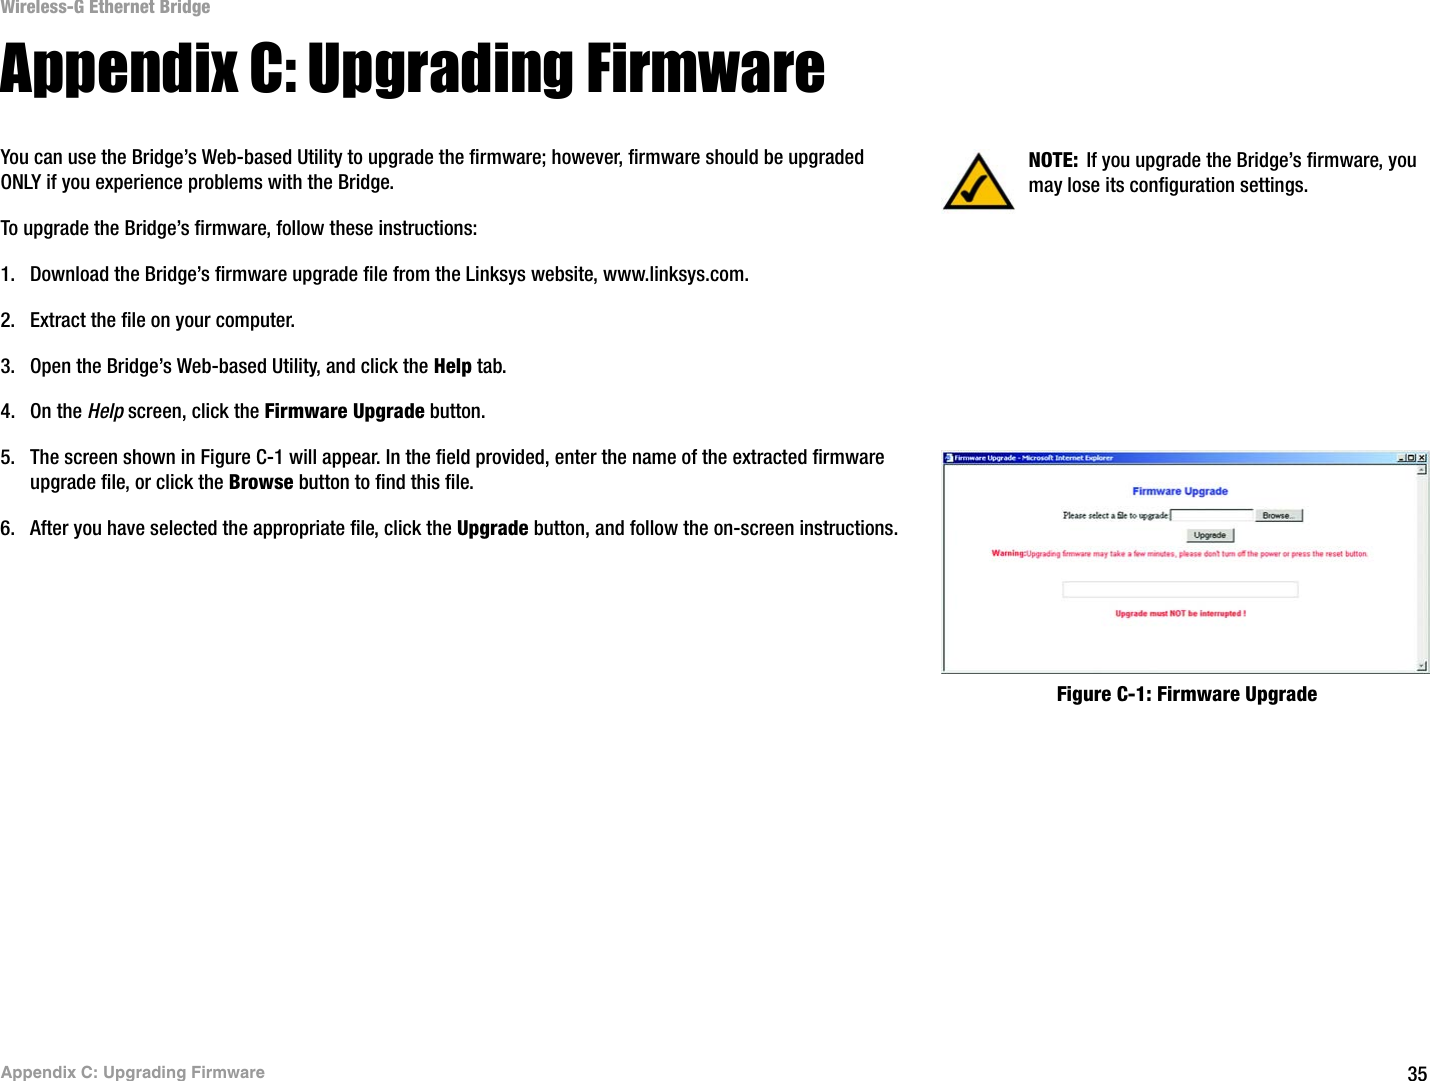 35Appendix C: Upgrading FirmwareWireless-G Ethernet BridgeAppendix C: Upgrading FirmwareYou can use the Bridge’s Web-based Utility to upgrade the firmware; however, firmware should be upgraded ONLY if you experience problems with the Bridge.To upgrade the Bridge’s firmware, follow these instructions:1. Download the Bridge’s firmware upgrade file from the Linksys website, www.linksys.com. 2. Extract the file on your computer.3. Open the Bridge’s Web-based Utility, and click the Help tab.4. On the Help screen, click the Firmware Upgrade button.5. The screen shown in Figure C-1 will appear. In the field provided, enter the name of the extracted firmware upgrade file, or click the Browse button to find this file. 6. After you have selected the appropriate file, click the Upgrade button, and follow the on-screen instructions.NOTE: If you upgrade the Bridge’s firmware, you may lose its configuration settings.Figure C-1: Firmware Upgrade